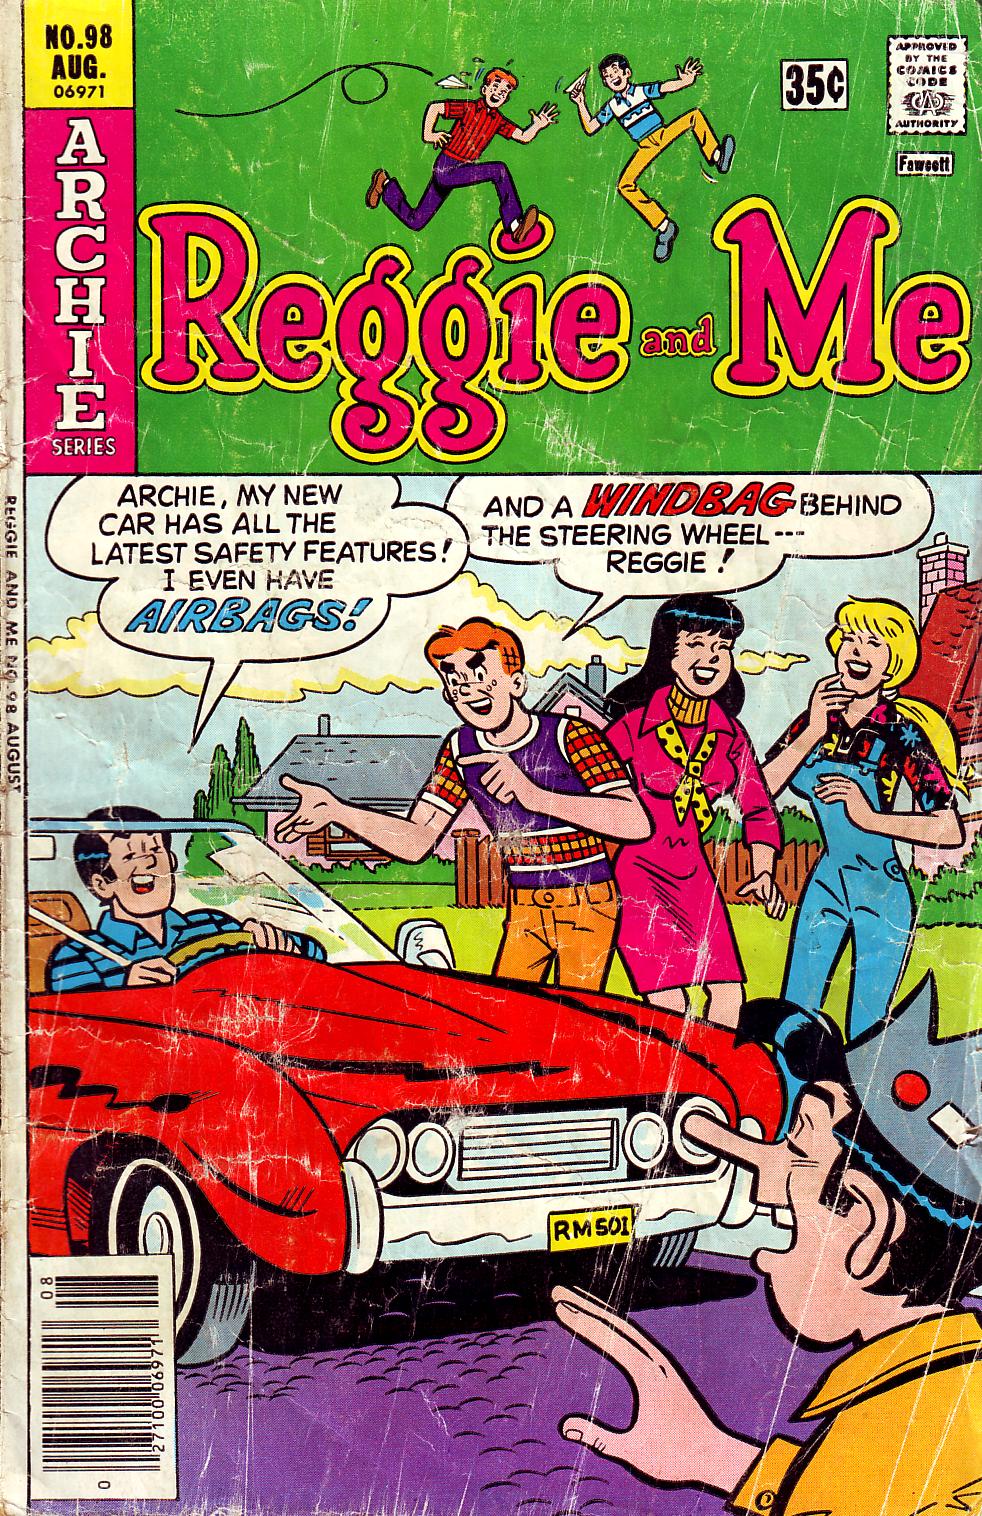 Reggie and Me (1966) issue 98 - Page 1